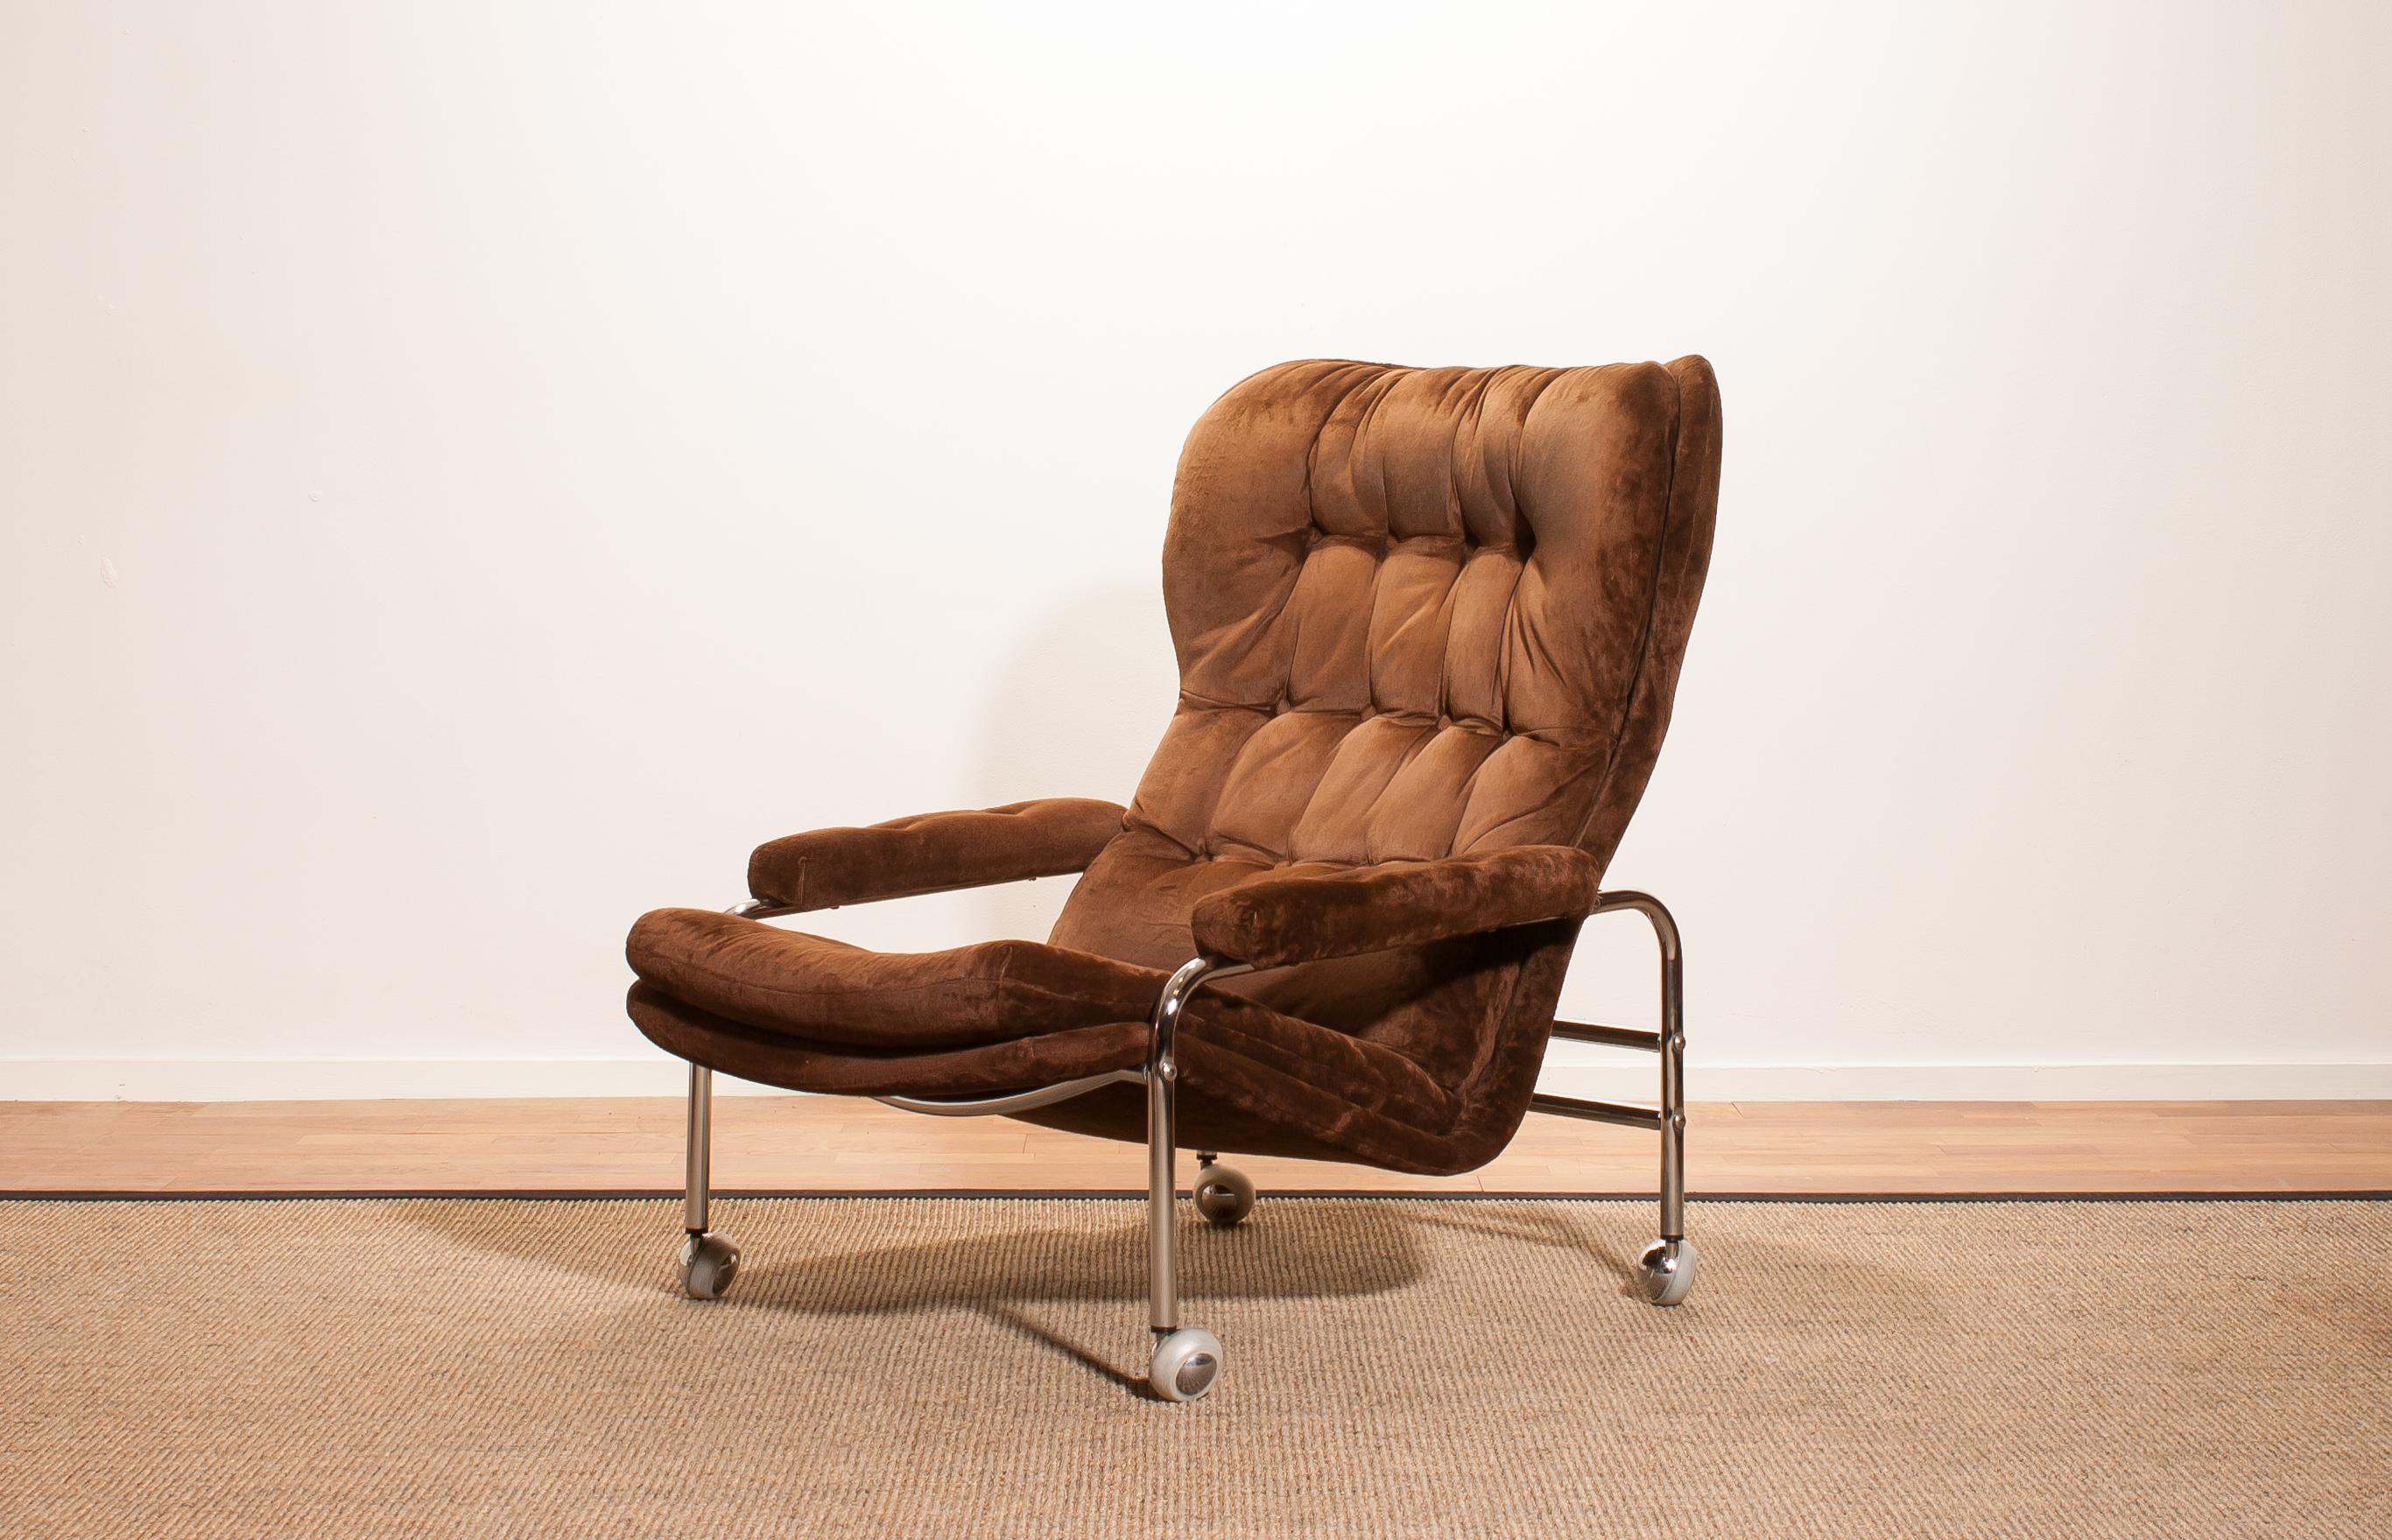 Beautiful lounge chair made by Scapa Rydaholm, Sweden.
This chair has a brown velour’s seating on a chromed wheeled frame.
It is in a very nice used condition with little bold spots in the fabric.
Period 1970s.
Dimensions: H 88 cm x W 73 cm x D